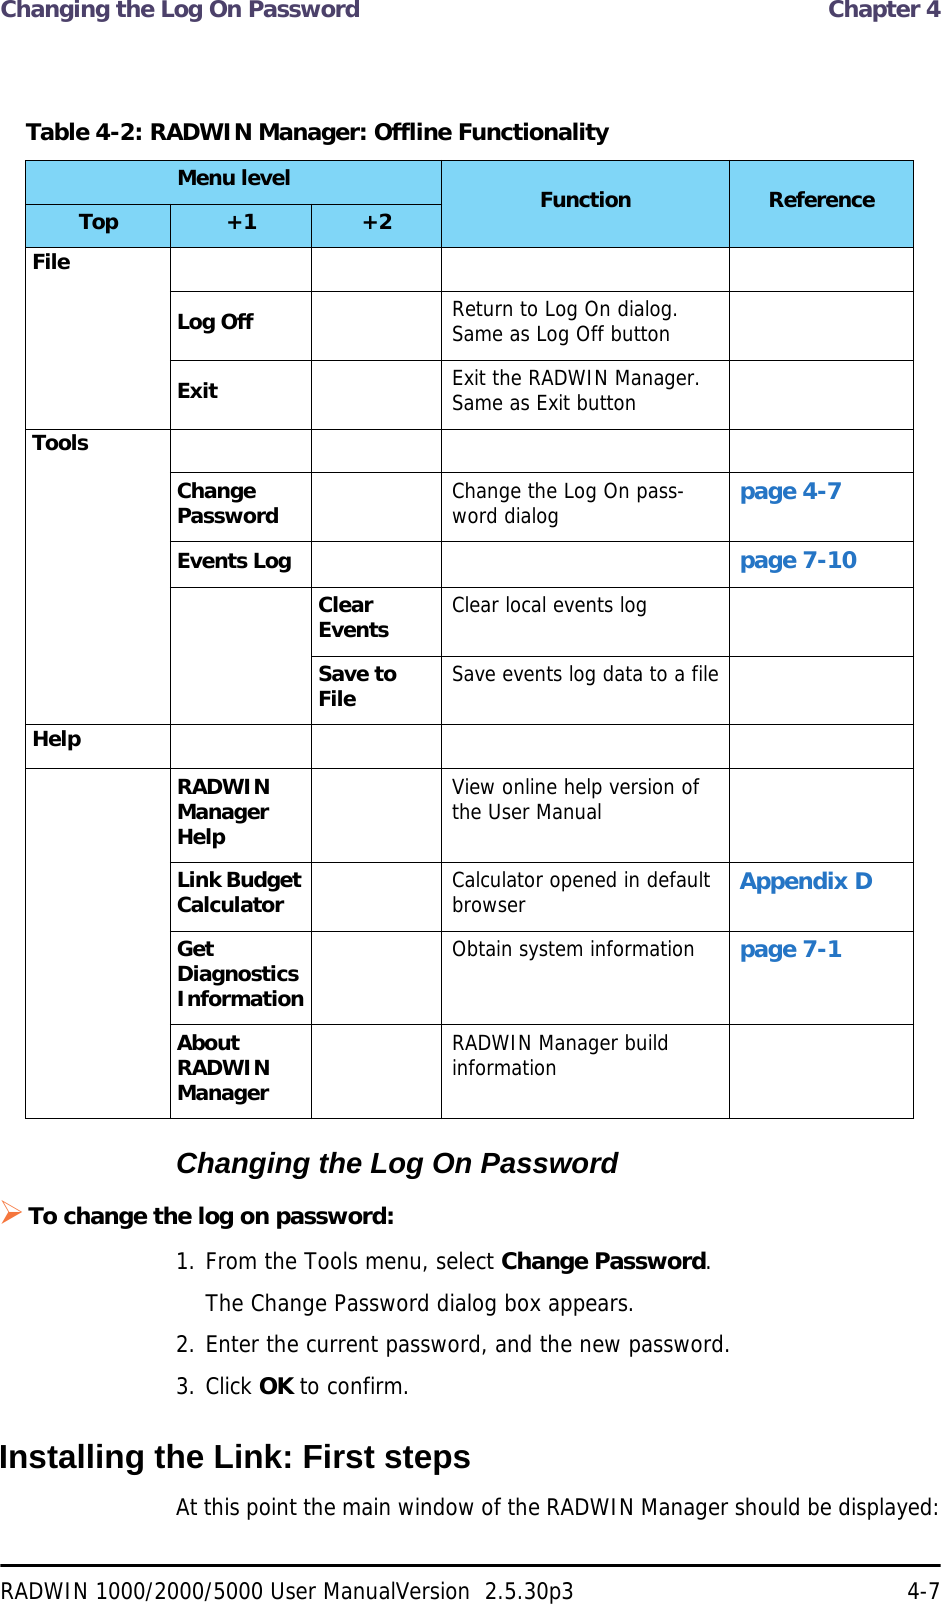 Changing the Log On Password  Chapter 4RADWIN 1000/2000/5000 User ManualVersion  2.5.30p3 4-7Changing the Log On PasswordTo change the log on password:1. From the Tools menu, select Change Password.The Change Password dialog box appears.2. Enter the current password, and the new password.3. Click OK to confirm.Installing the Link: First stepsAt this point the main window of the RADWIN Manager should be displayed:Table 4-2: RADWIN Manager: Offline FunctionalityMenu level Function ReferenceTop +1 +2FileLog Off Return to Log On dialog. Same as Log Off buttonExit Exit the RADWIN Manager. Same as Exit buttonToolsChange Password Change the Log On pass-word dialog page 4-7Events Log page 7-10Clear Events Clear local events logSave to File Save events log data to a fileHelpRADWIN Manager HelpView online help version of the User ManualLink Budget Calculator Calculator opened in default browser Appendix DGet Diagnostics InformationObtain system information page 7-1About RADWIN ManagerRADWIN Manager build information